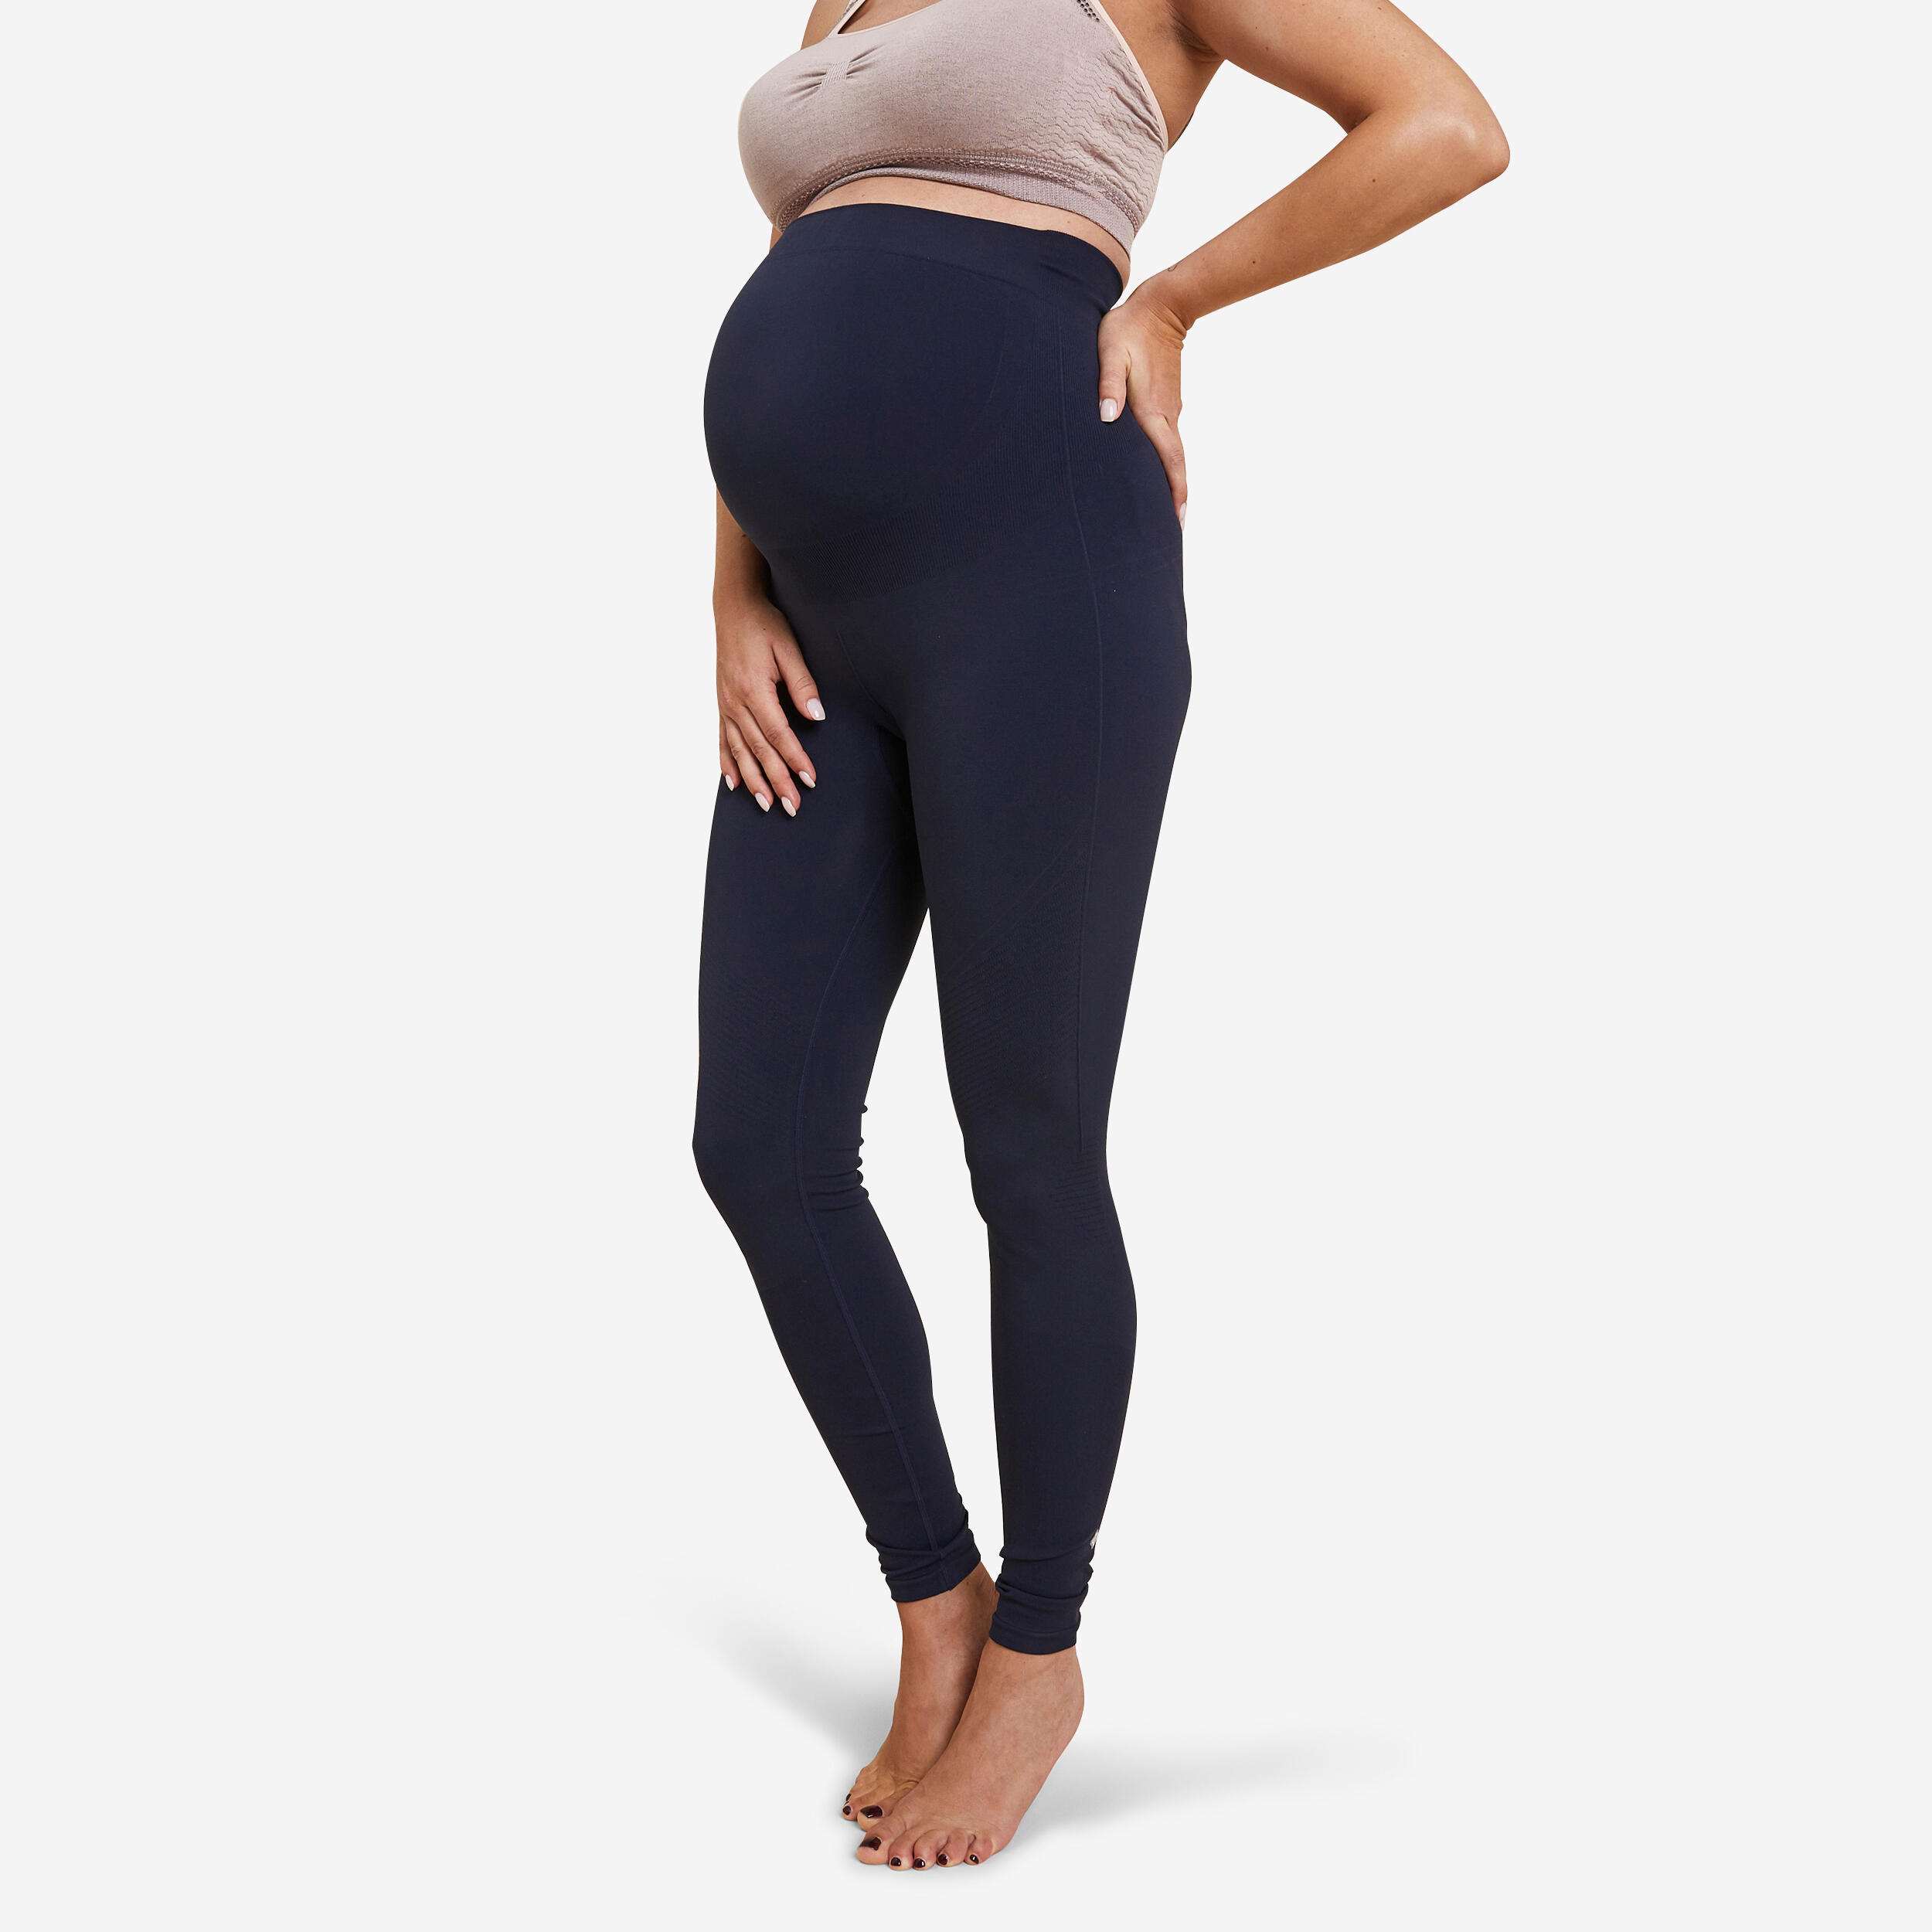 Women's Maternity Workout Leggings Over The Belly Pregnancy Yoga